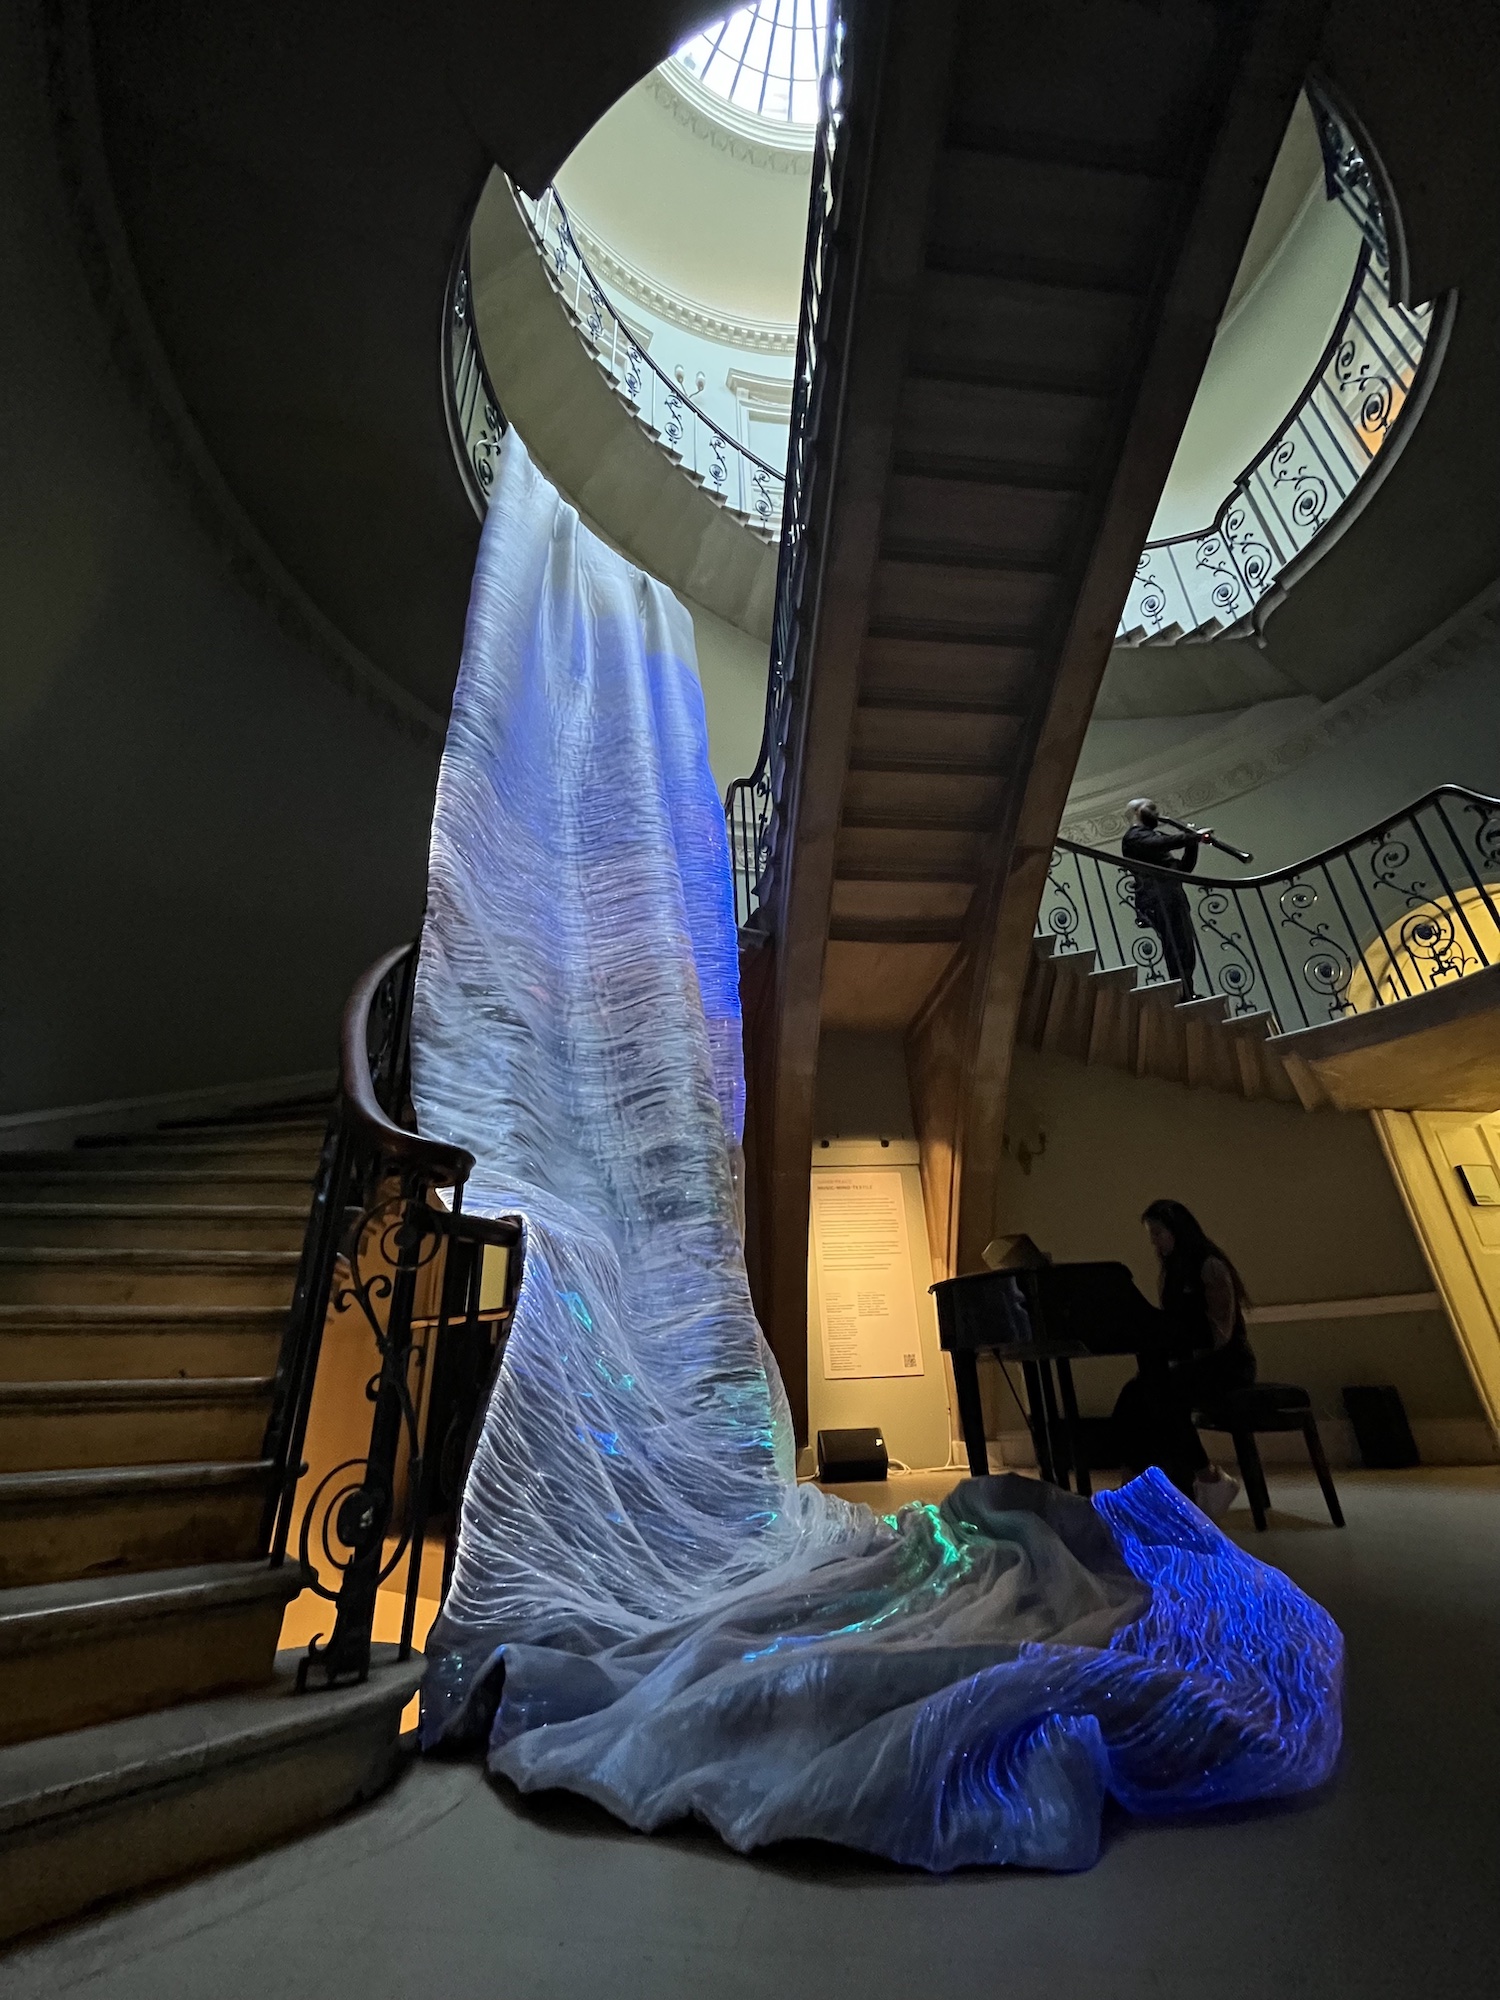 Amelia Peng’s ‘Music-Mind-Textile’ installed at Somerset House with musicians from the Royal College of Music playing live on the opening night of the London Design Biennale. Aaron Hargreaves / Foster + Partners